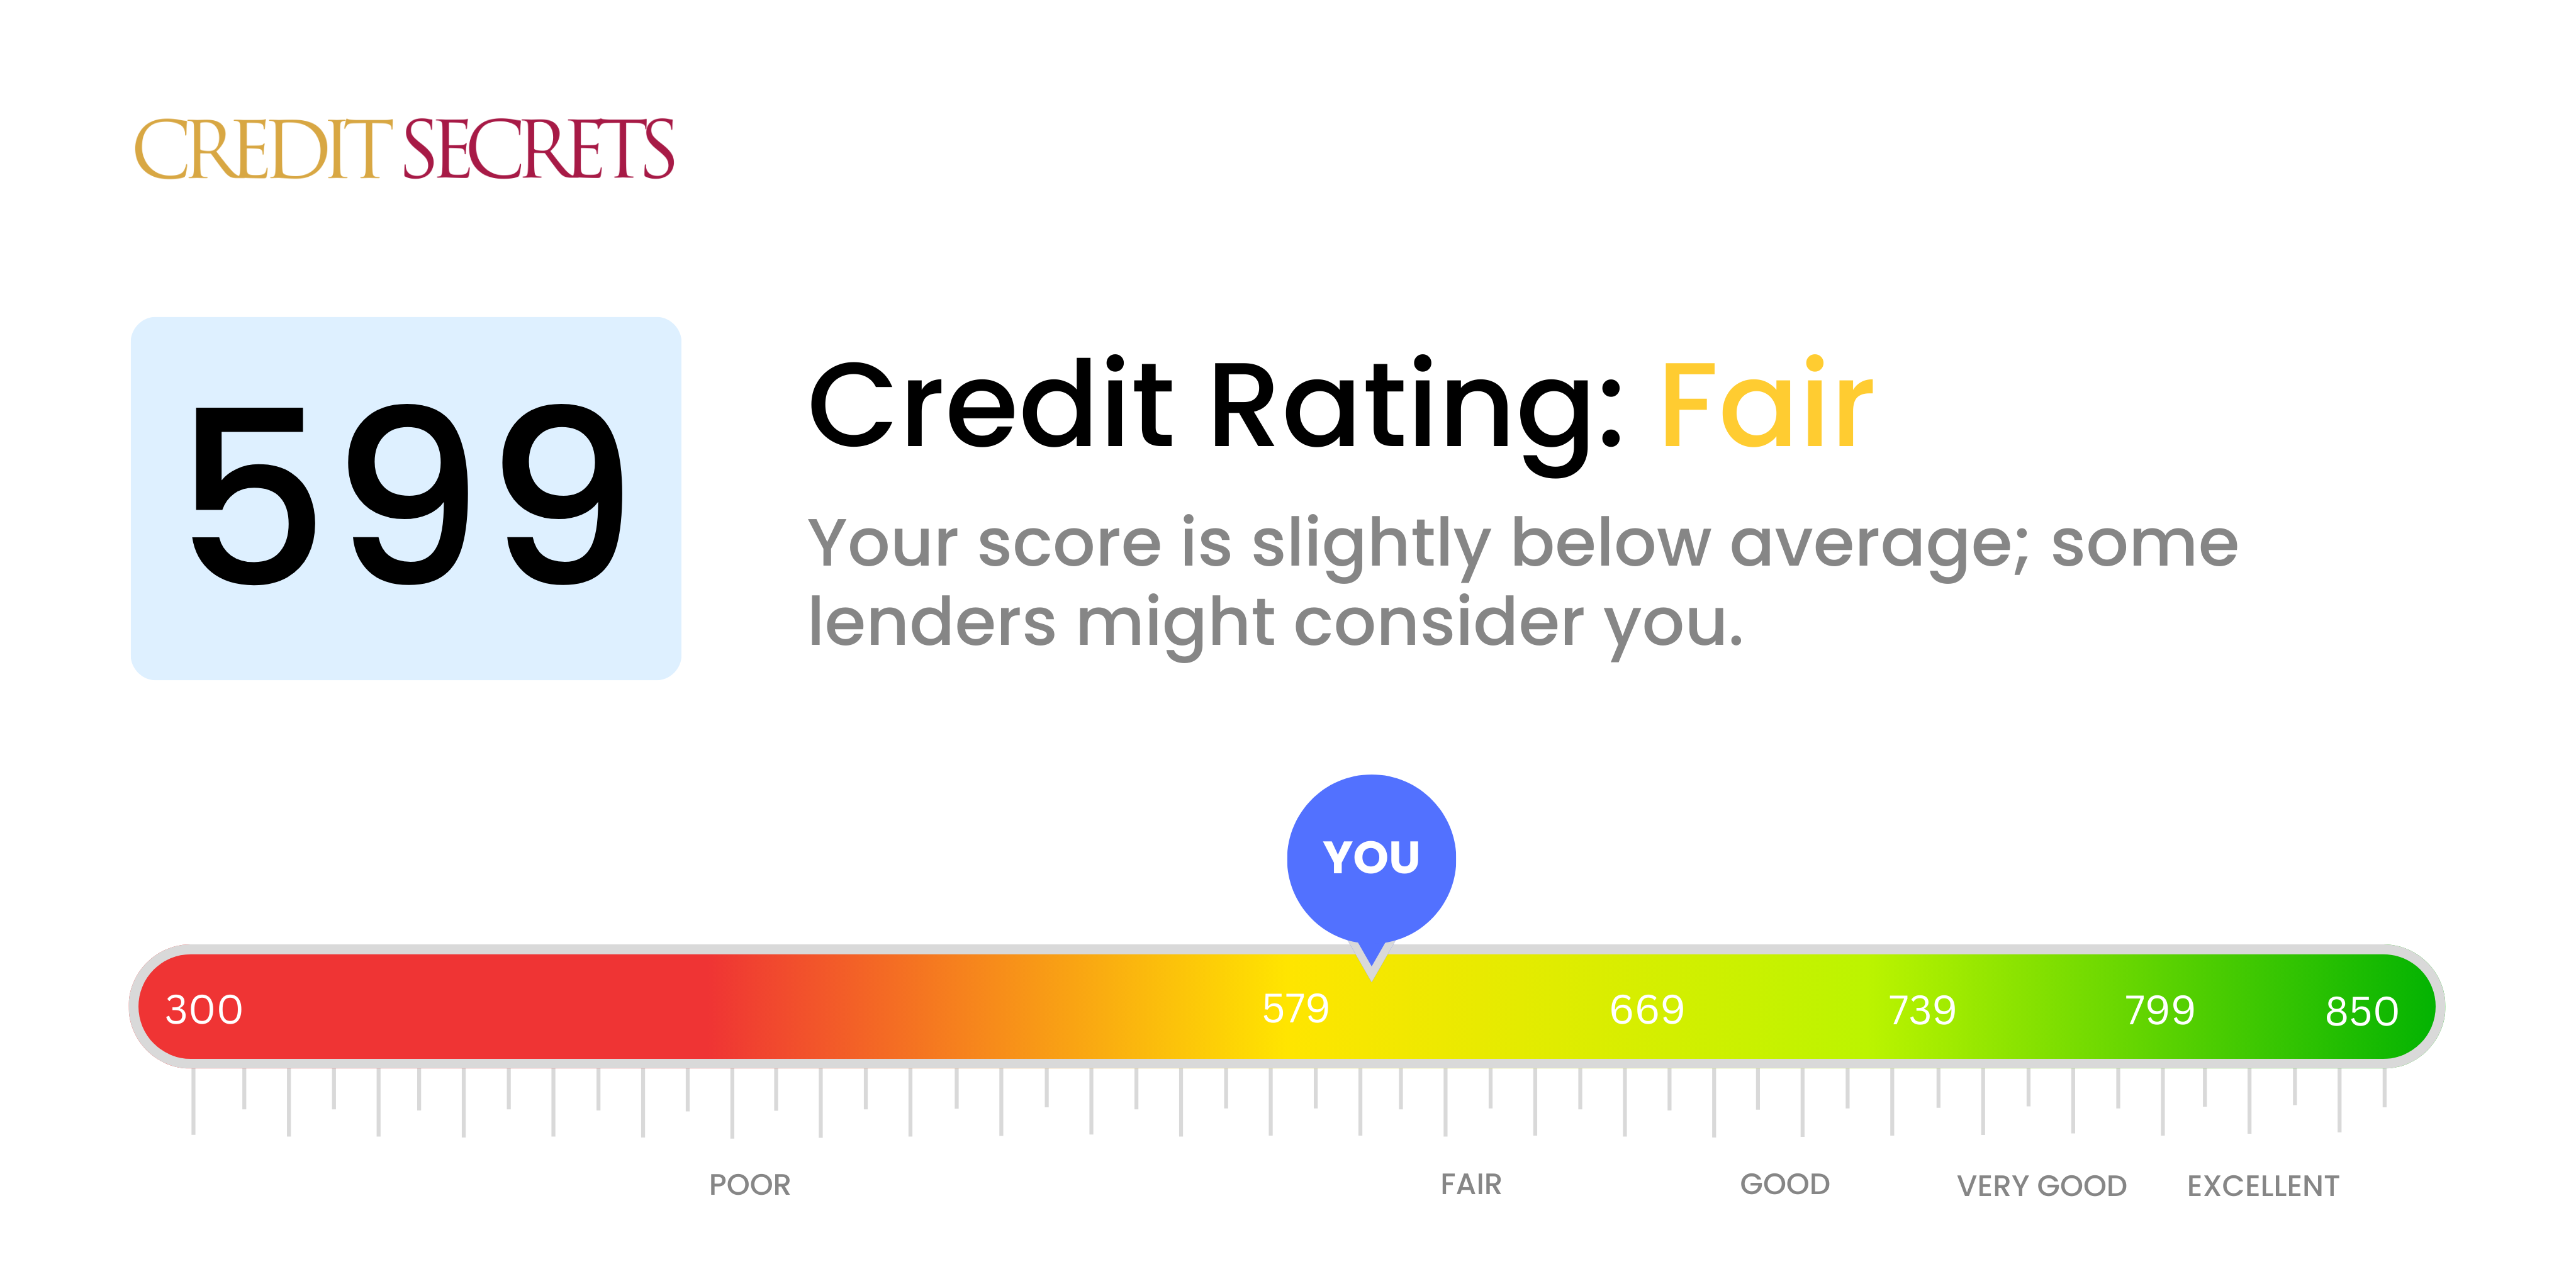 Is 599 a good credit score?